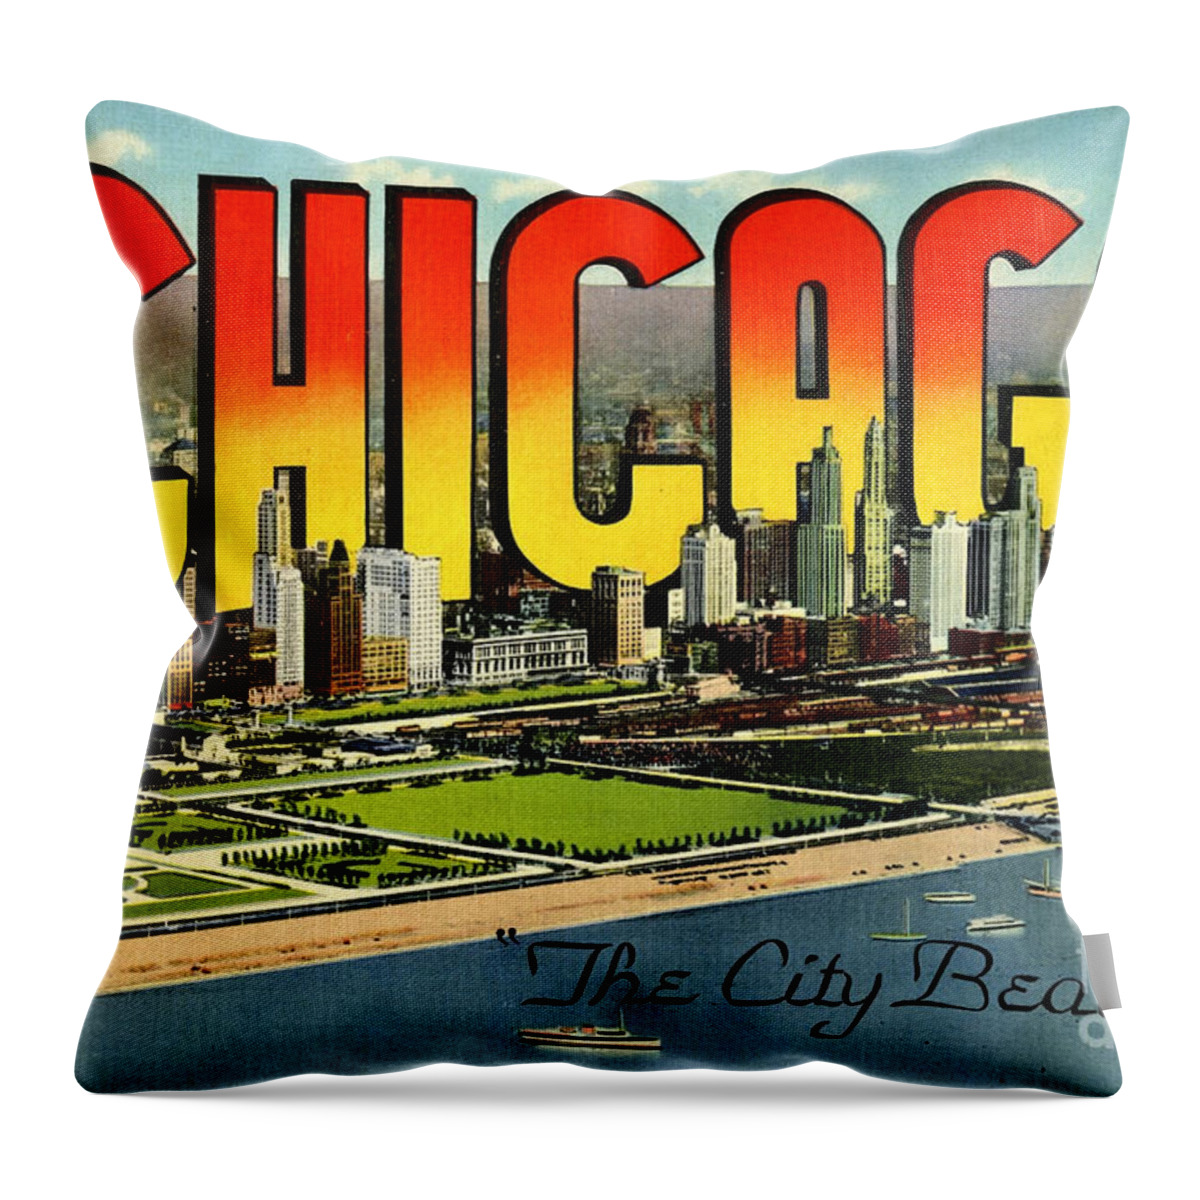 Retro Throw Pillow featuring the photograph Retro Chicago Poster by Action